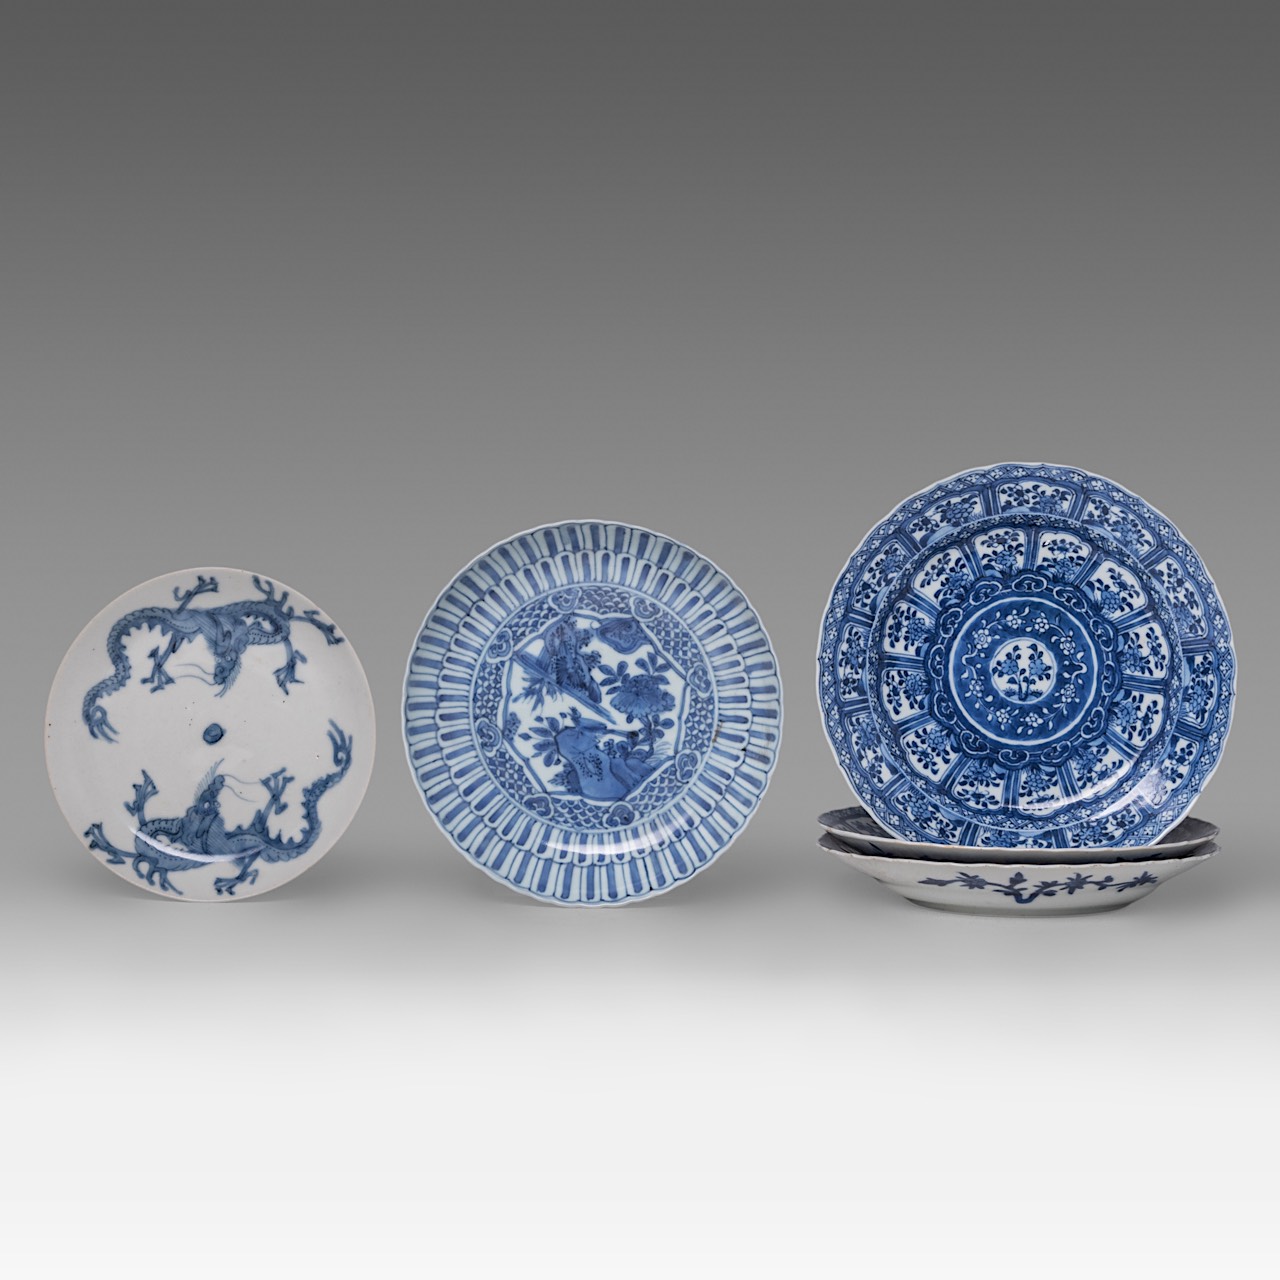 A small collection of Chinese blue and white dishes, including a 'Dragon' plate, Ming dynasty, and K